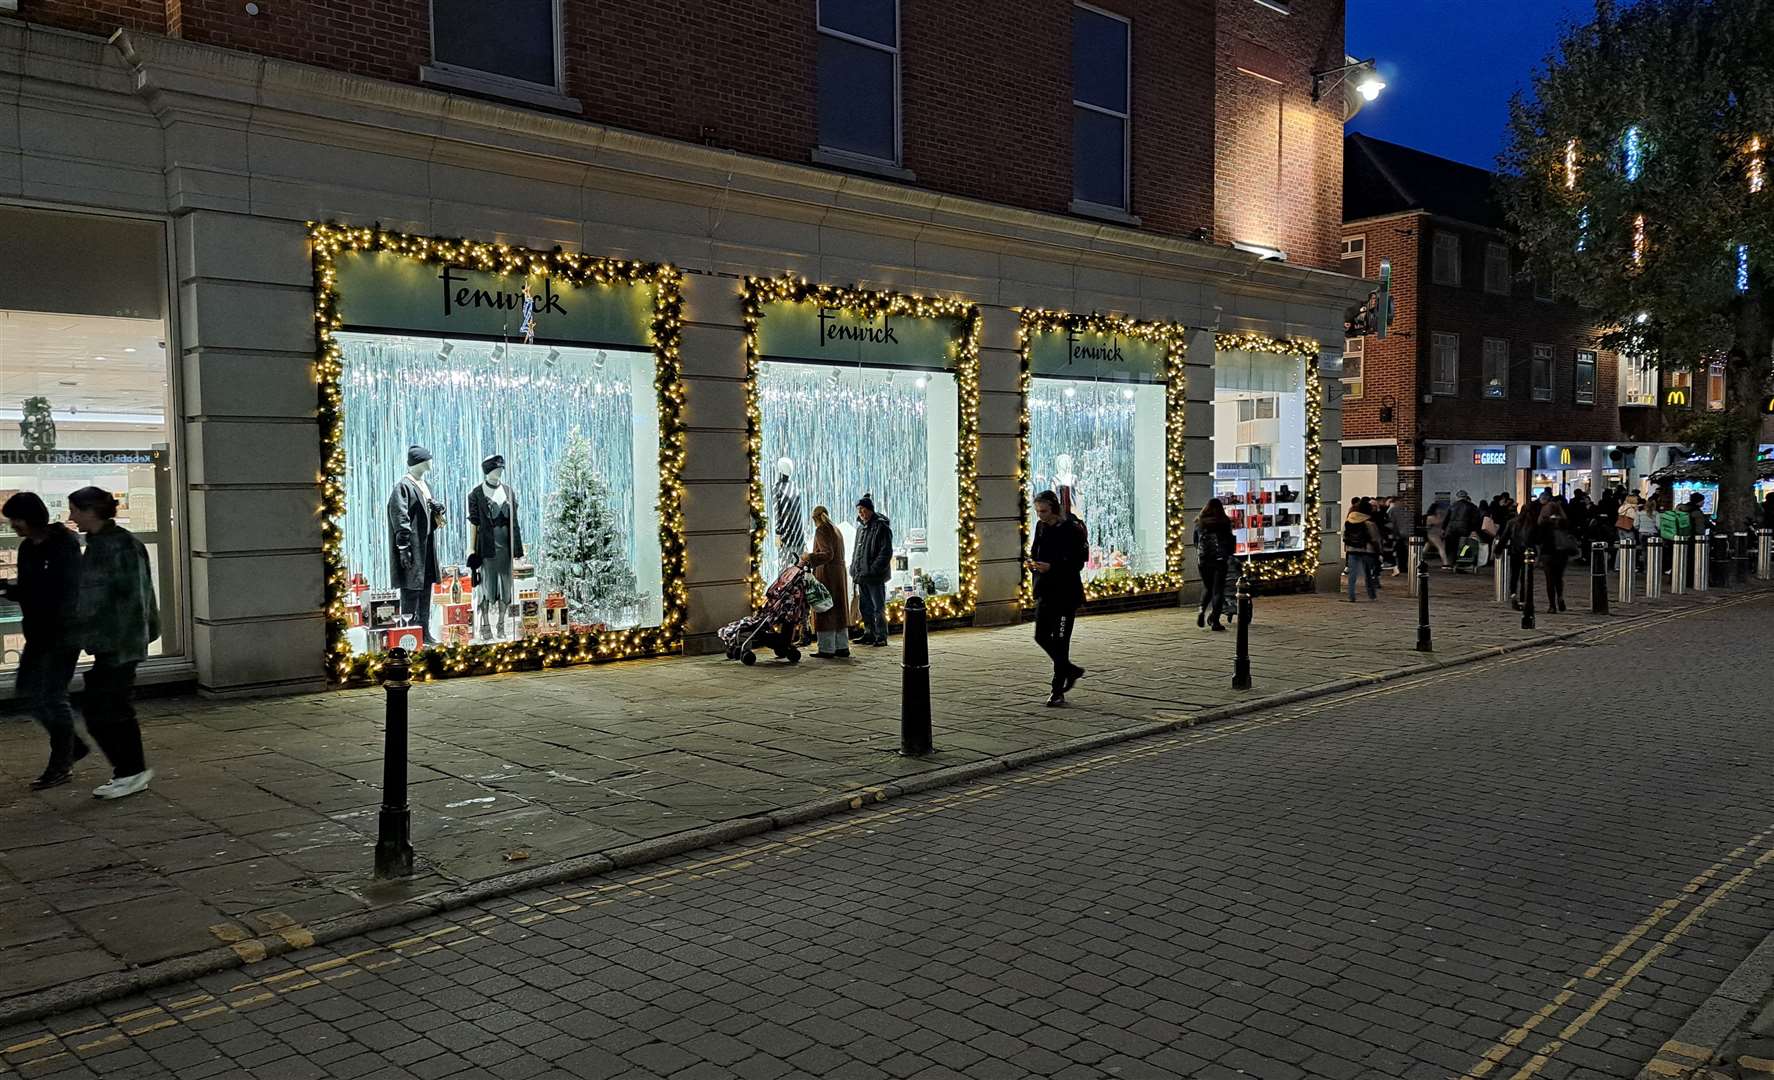 Ted Baker is sold from Canterbury’s Fenwick store